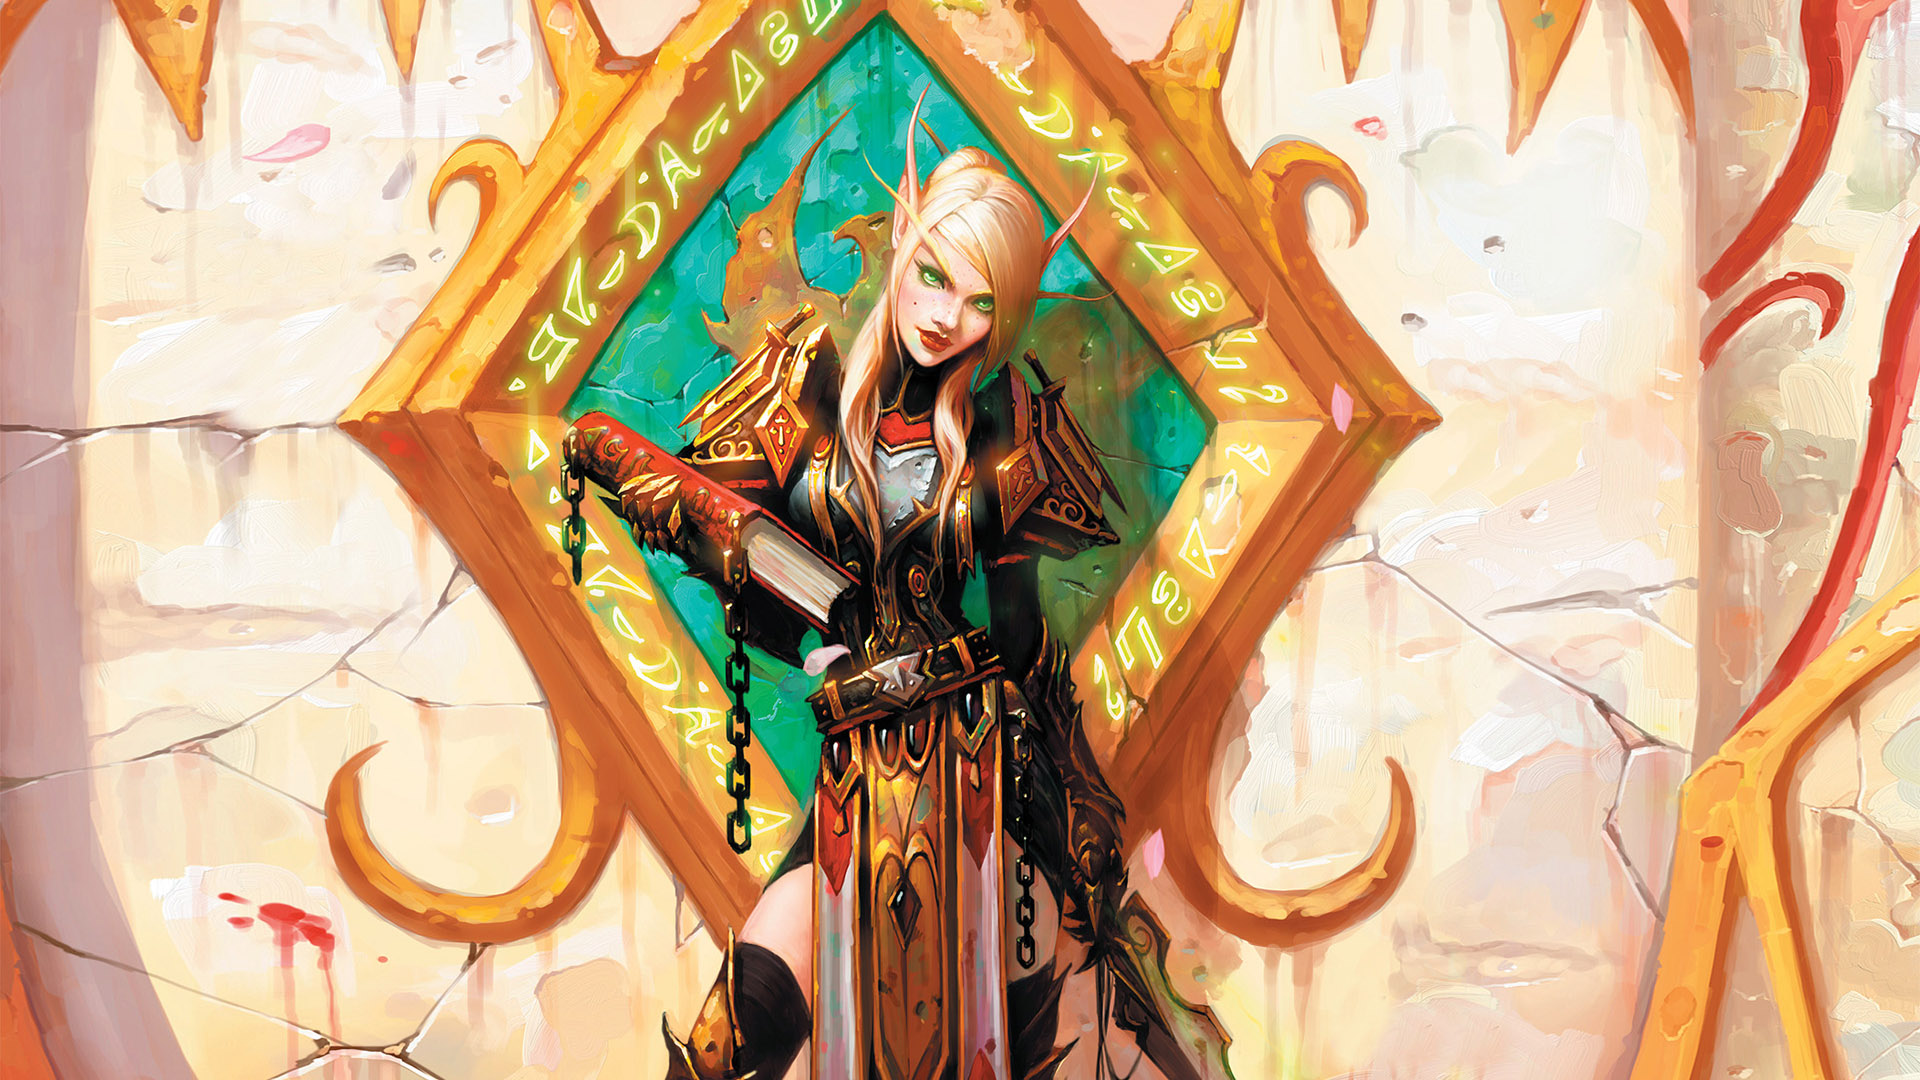 General 1920x1080 World of Warcraft video games blood elves elves women PC gaming fantasy art fantasy girl green eyes video game art video game girls blonde books chains standing red lipstick